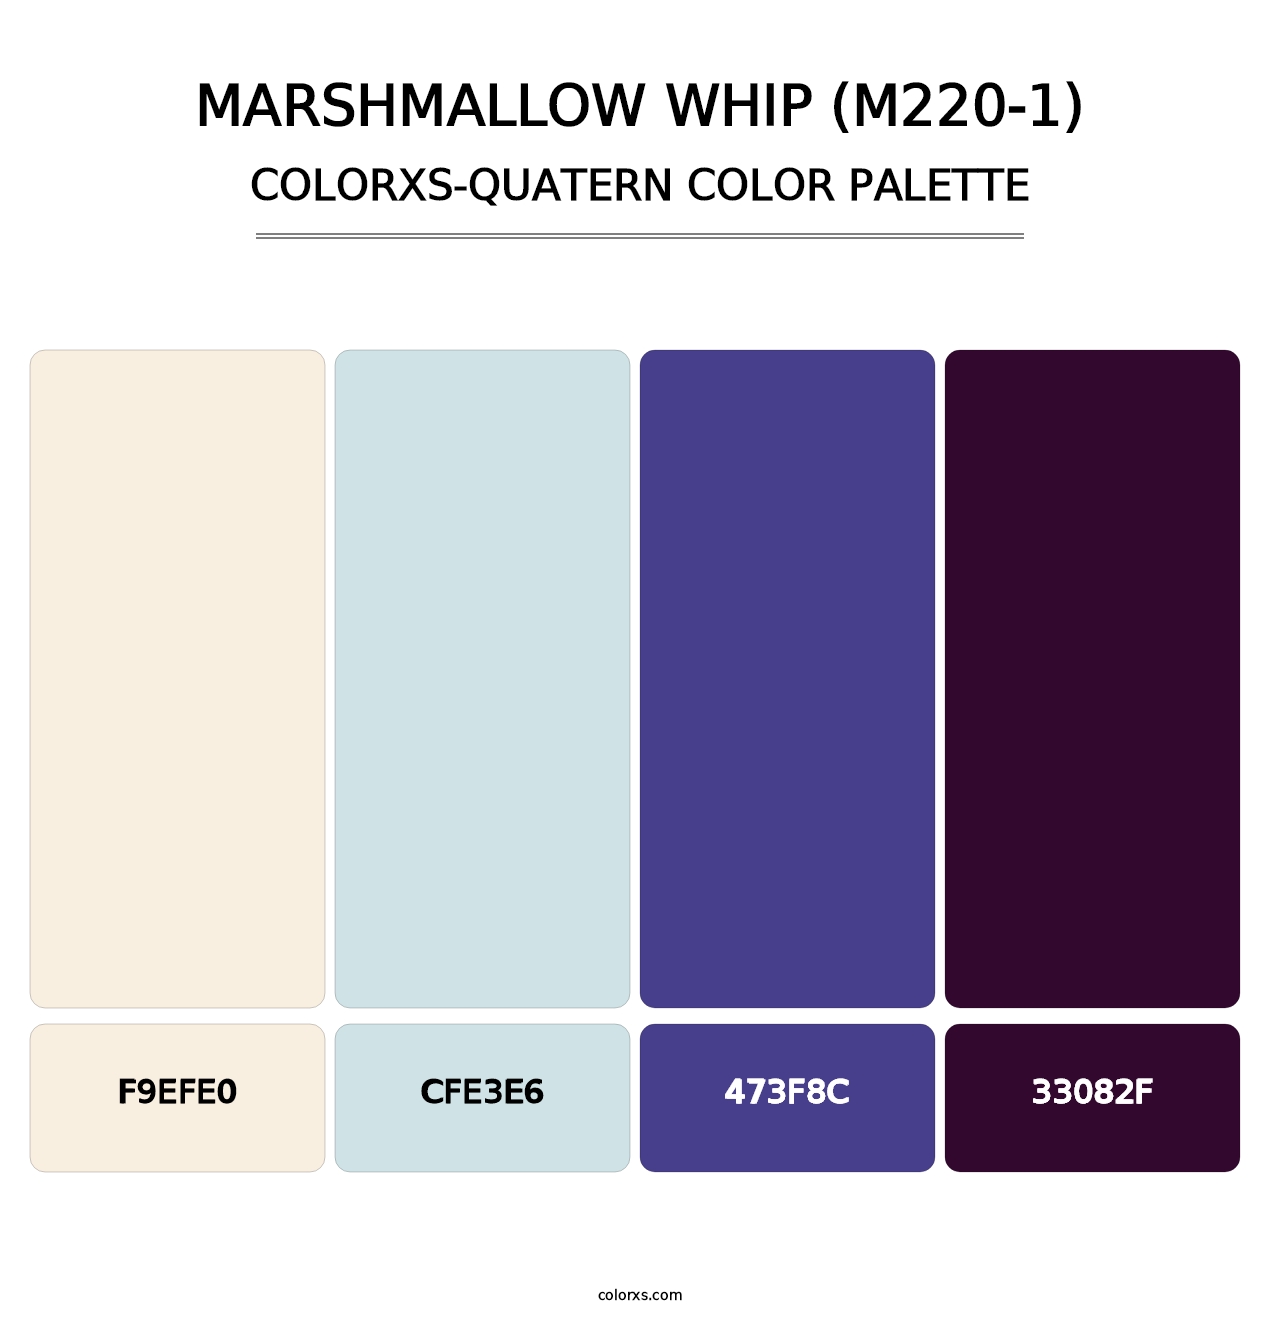 Marshmallow Whip (M220-1) - Colorxs Quatern Palette